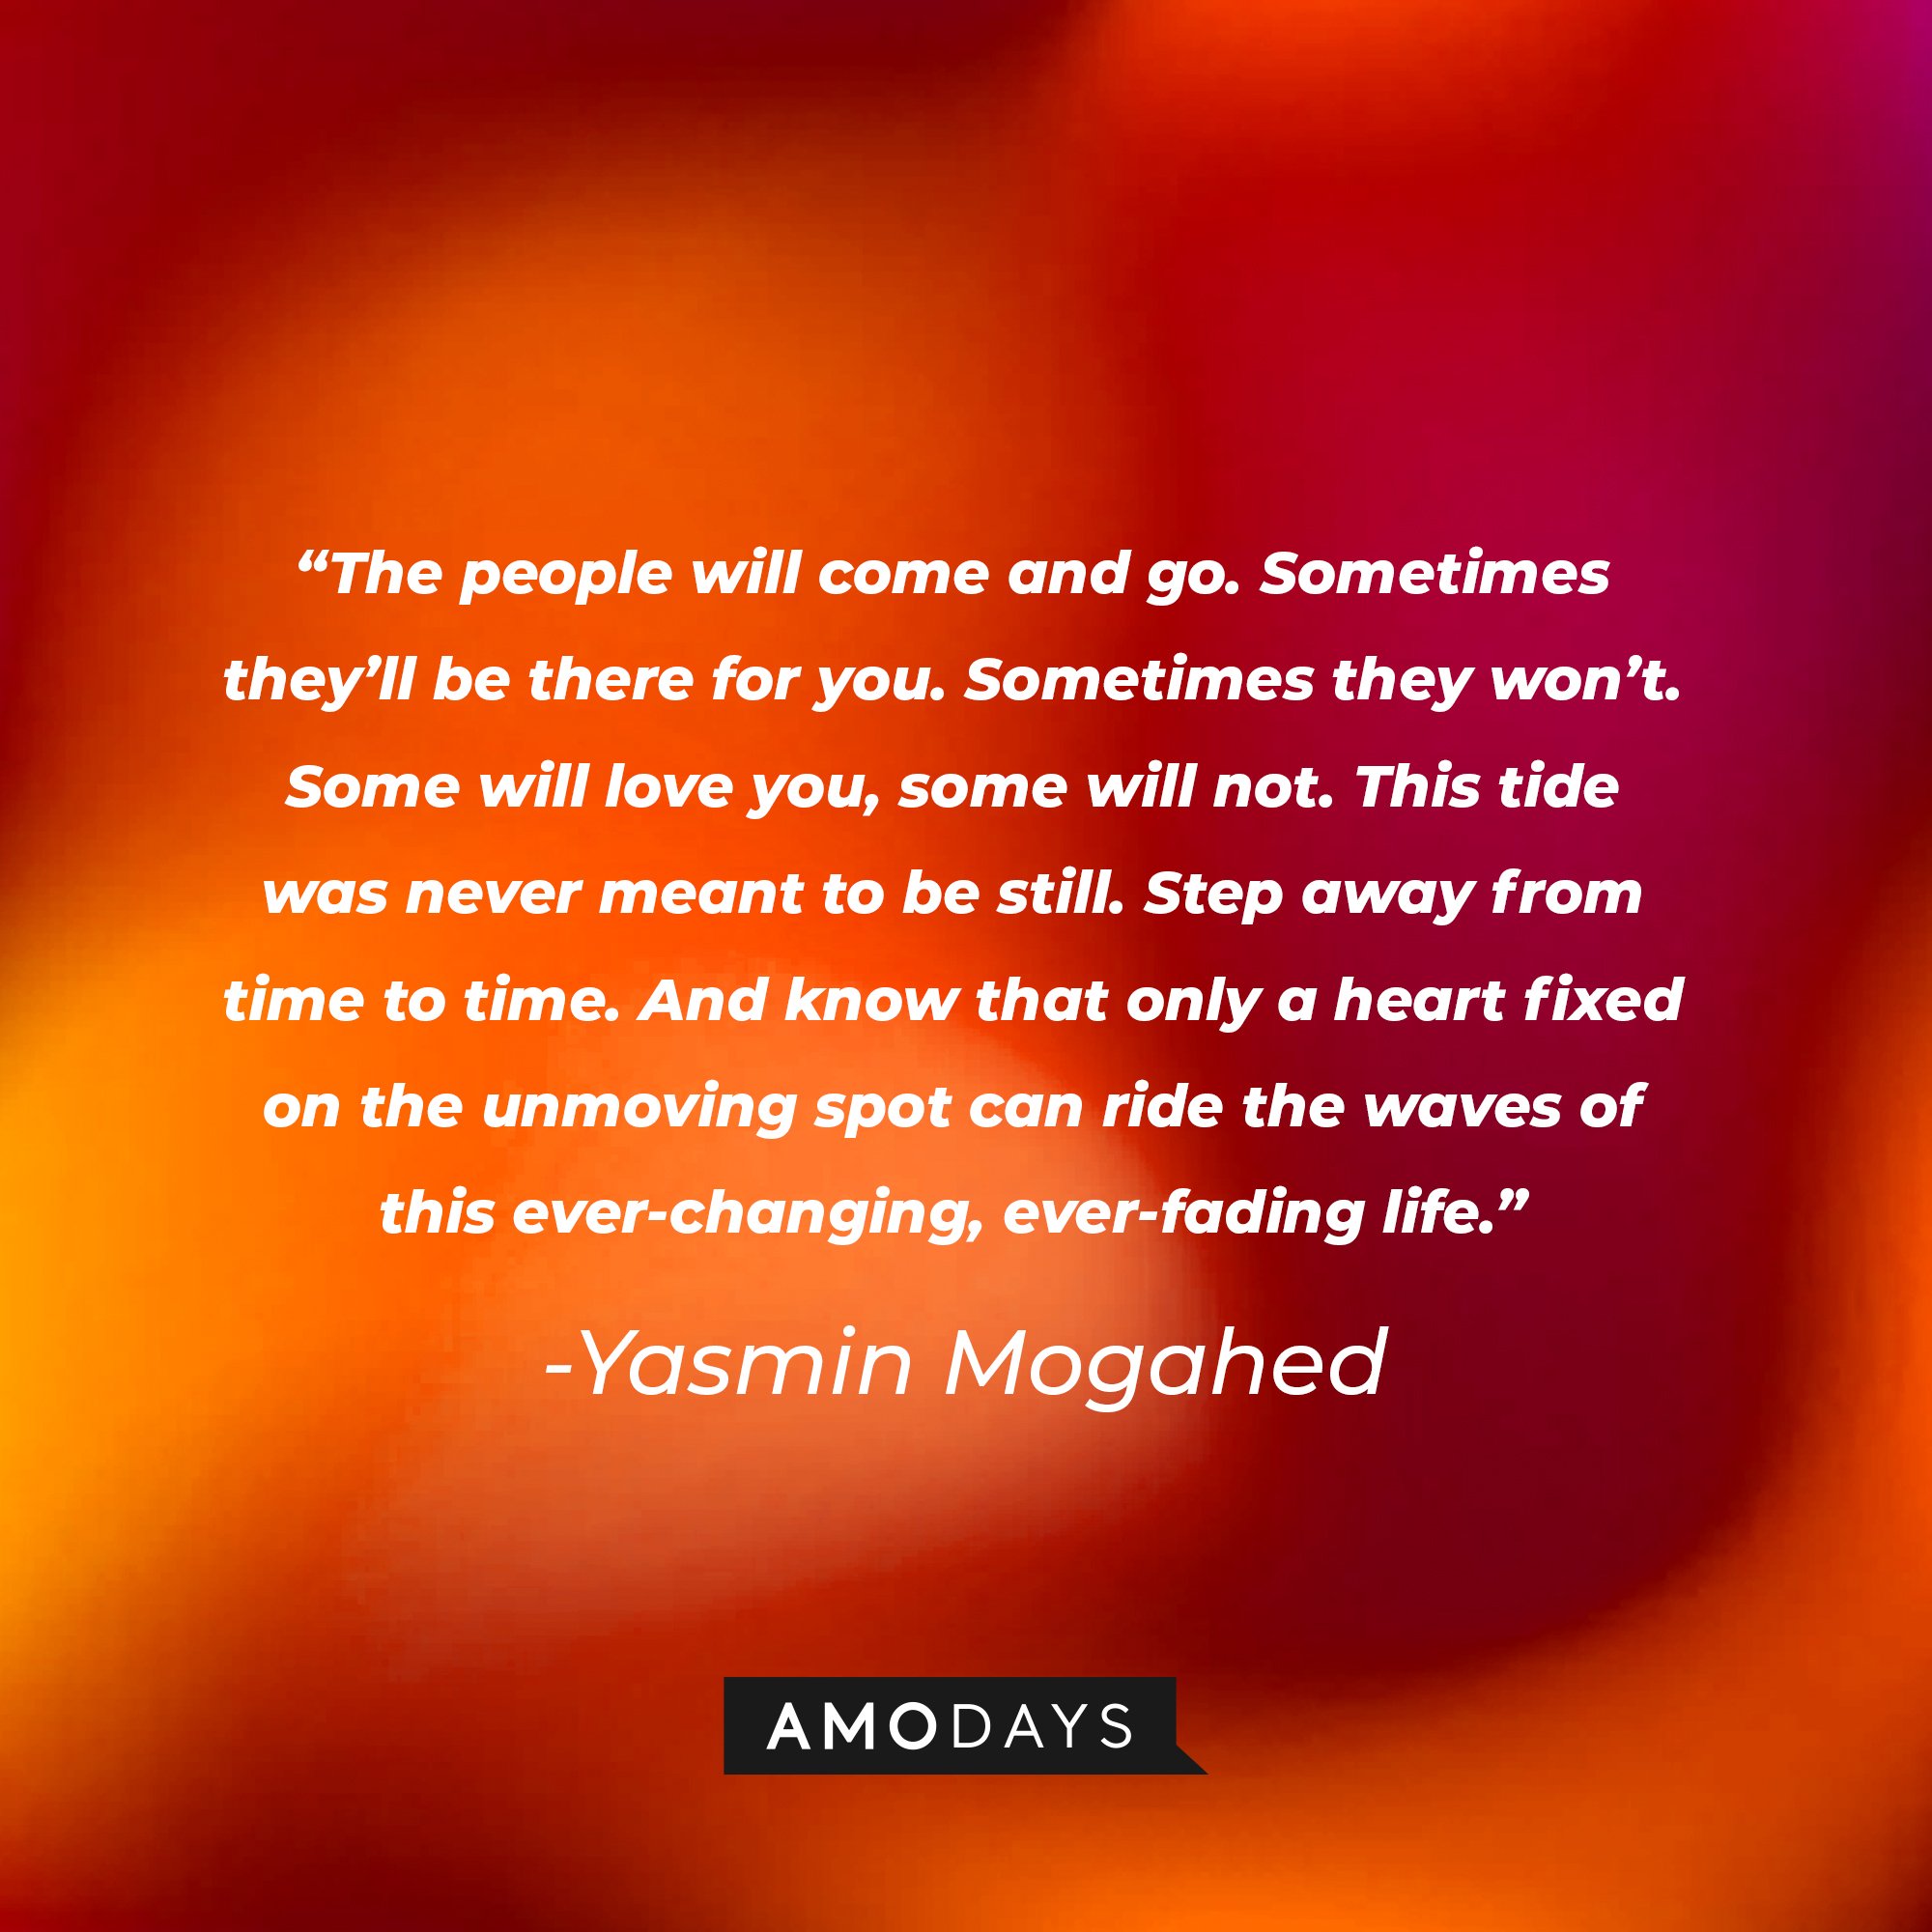 Yasmin Mogahed’s quote: “The people will come and go. Sometimes they'll be there for you. Sometimes they won't. Some will love you; some will not. This tide was never meant to be still. Step away from time to time. And know that only a heart fixed on the unmoving spot can ride the waves of this ever-changing, ever-fading life." | Image: AmoDays